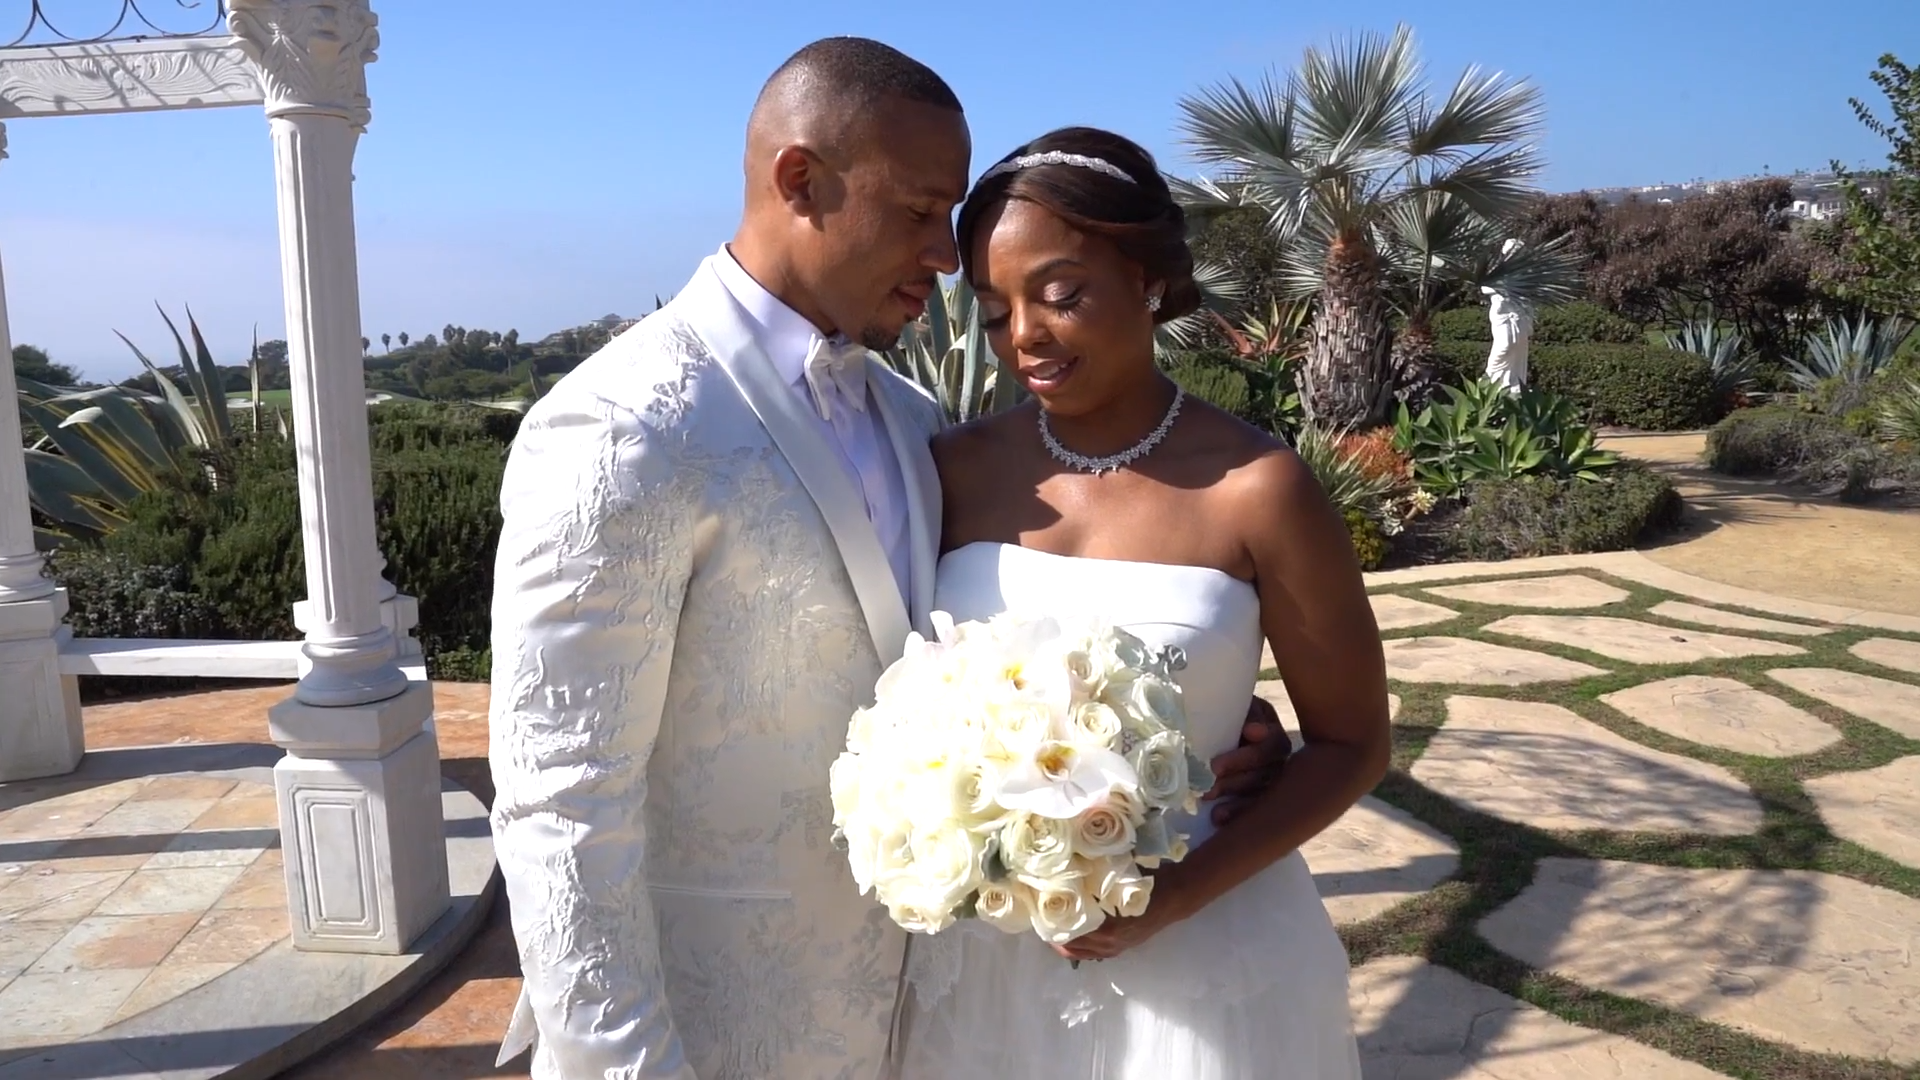 Exclusive Photos Of Jemele Hill and Ian Wallace’s California Wedding Ceremony